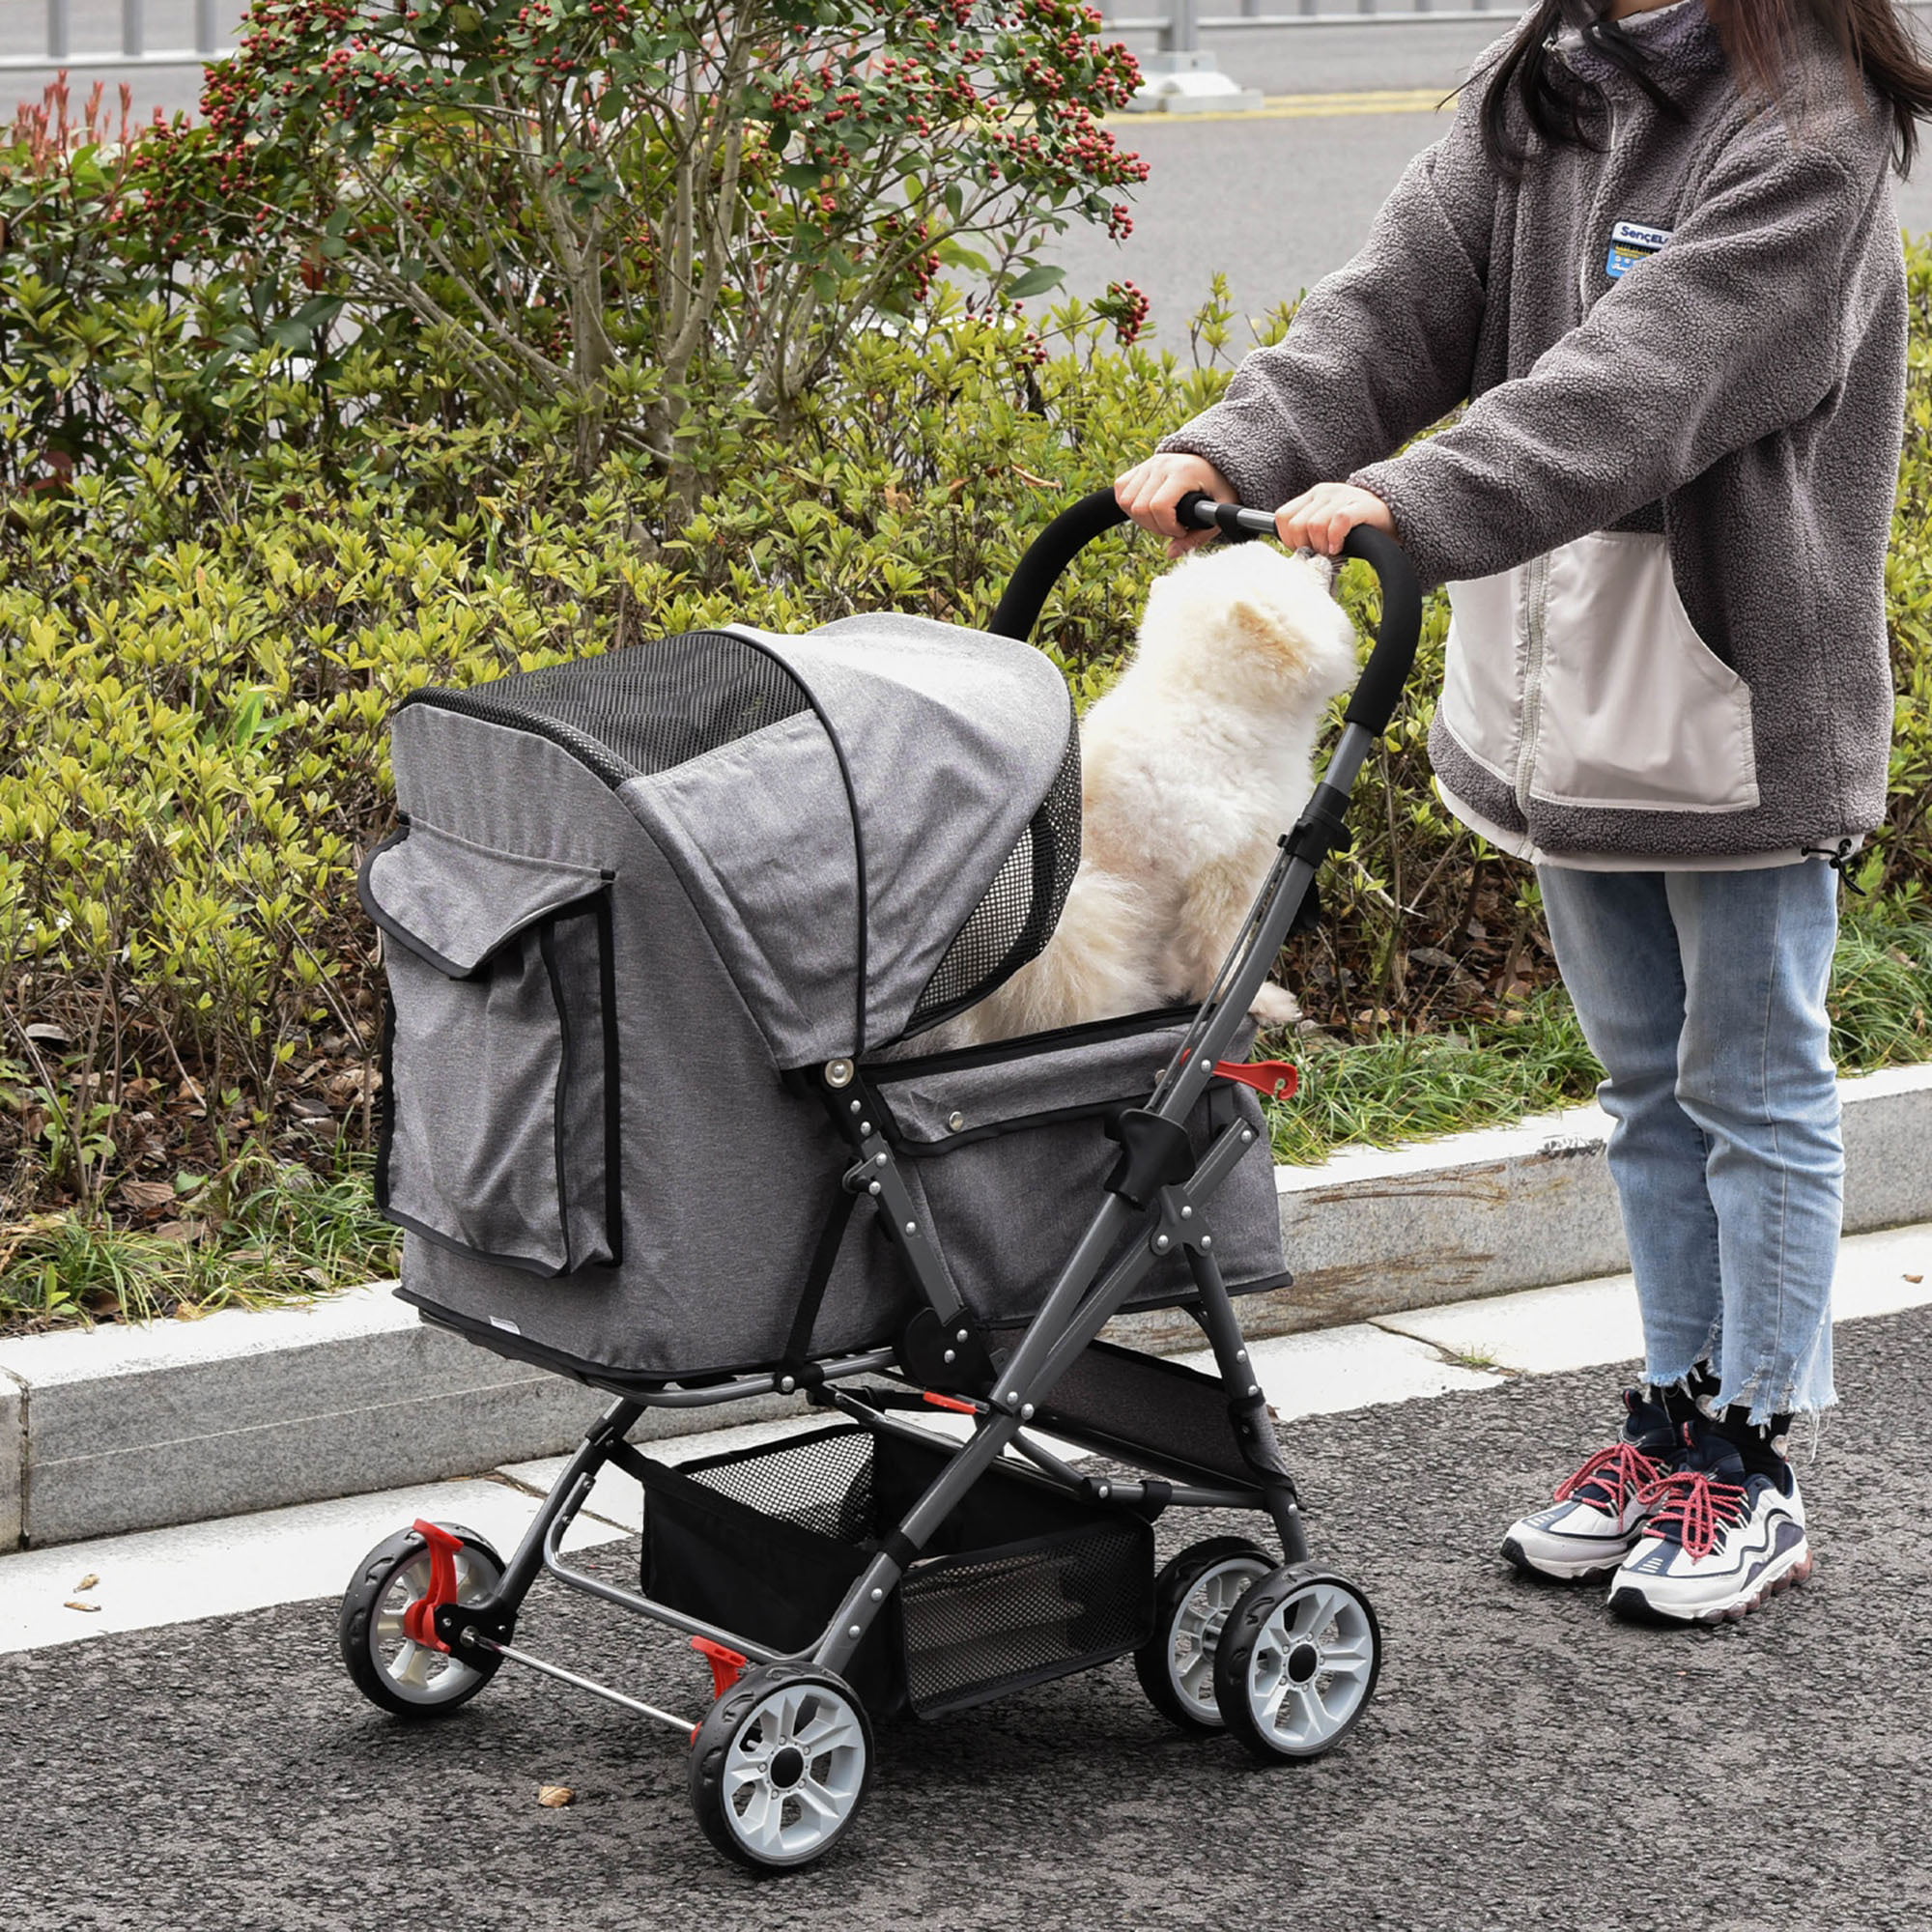 Blue Removable Liner Dog Strollers for Small Dogs Pet Stroller Cat Stroller for 2 Cats 3-Wheel Foldable Traveling Lightweight Puppy Stroller Doggie Pet Carriage with Cup Holder Mesh Windows 